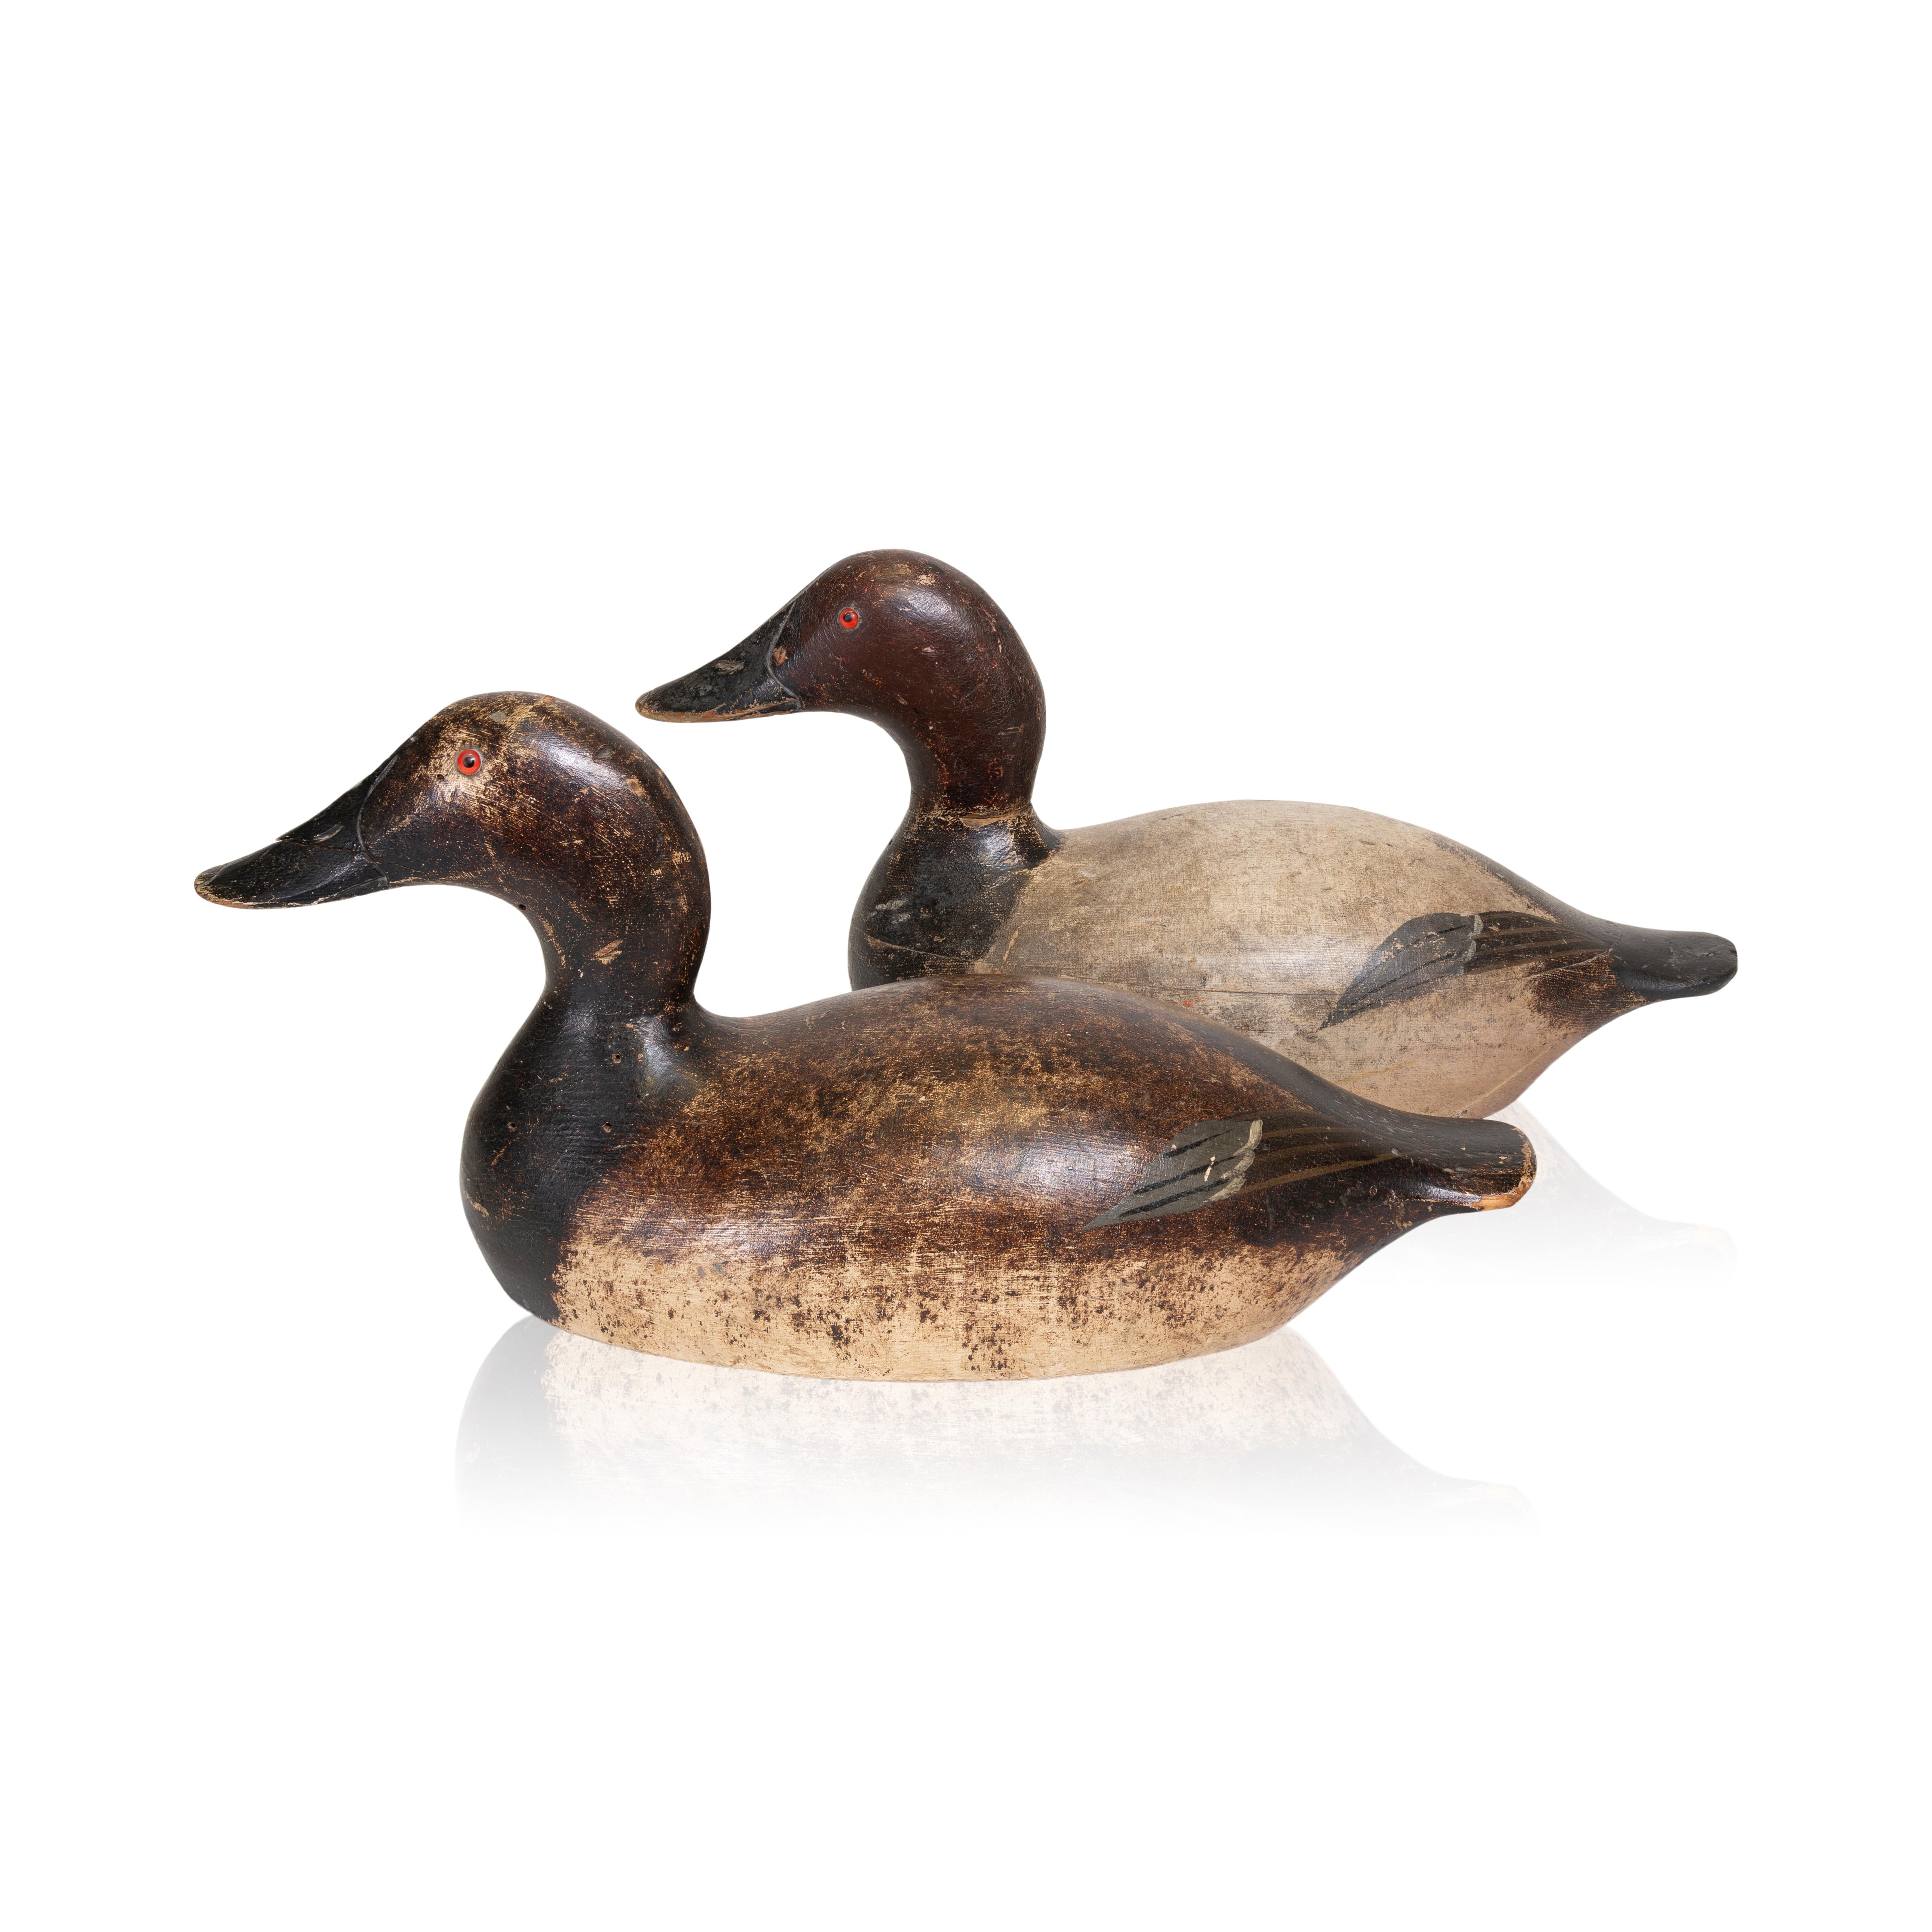 Pair of Evans Factory canvasbacks
Item Number: Y606A

Pair of Evans Factory canvasbacks. Original paint, hand carved, glass eyes. Were used in Wisconsin. Almost complete wing paint remains. One bottom carved W.E.T. Assume the hunter.

Period: